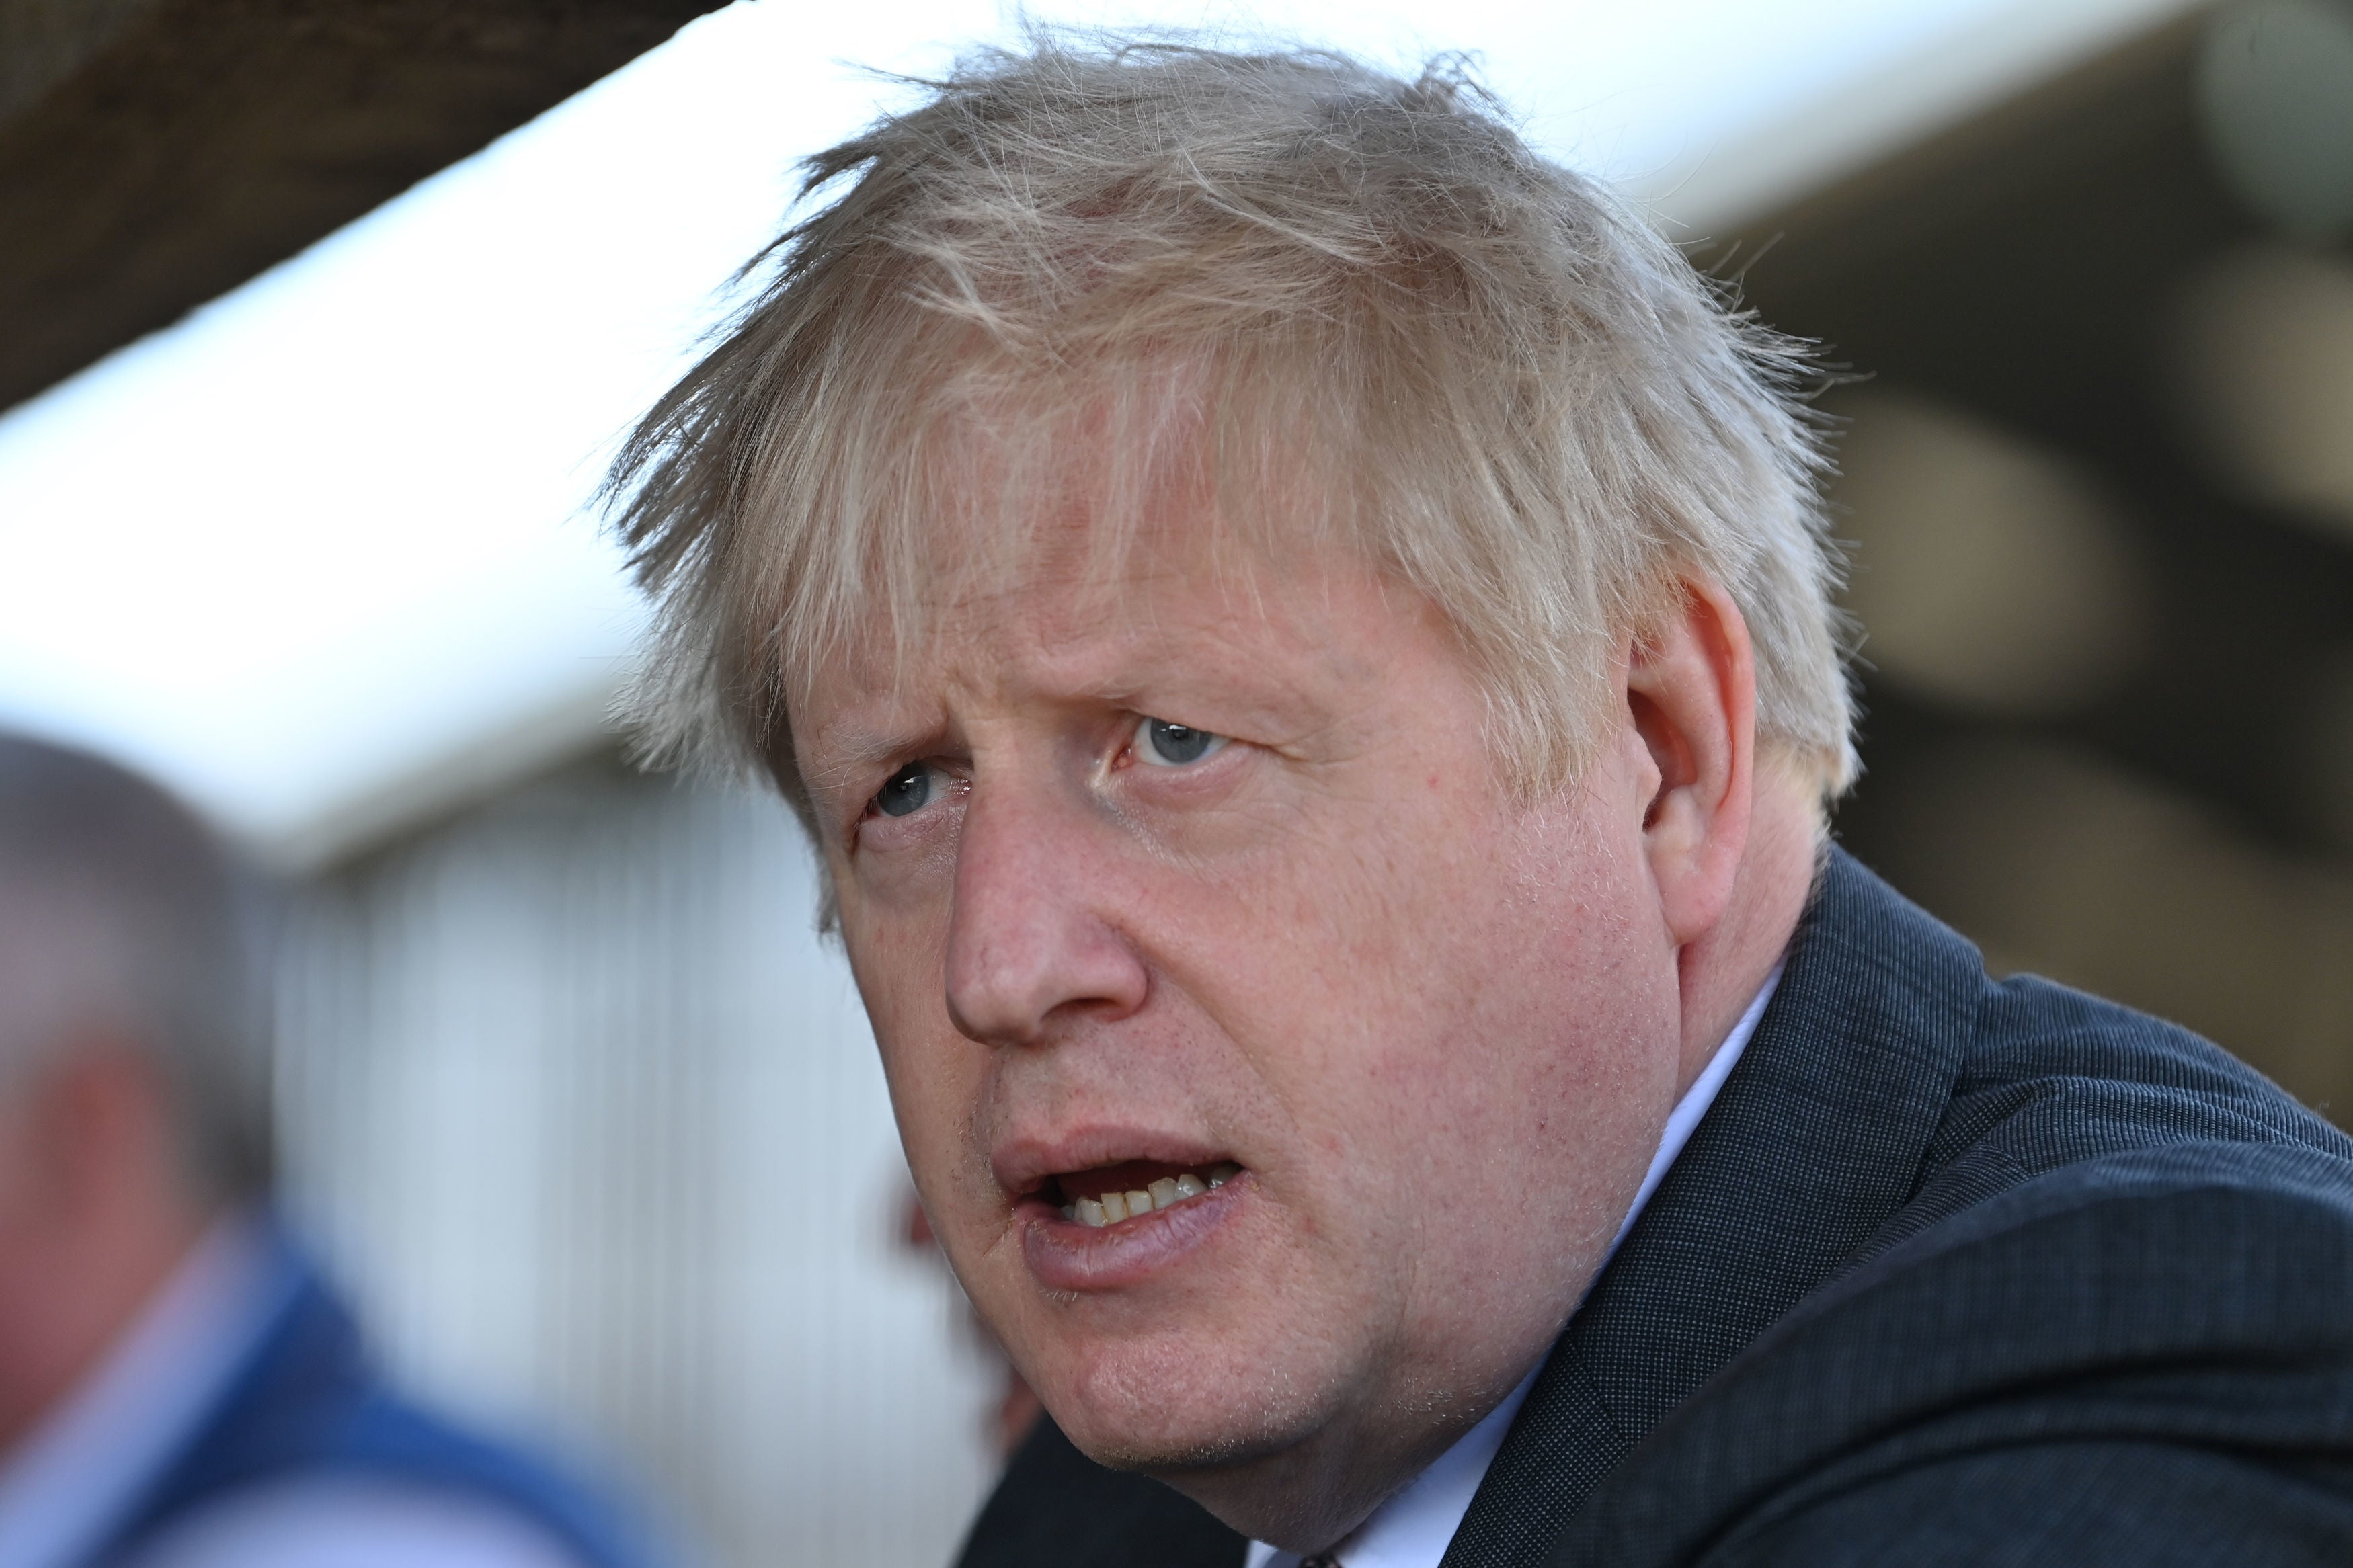 Boris Johnson during a visit to Moreton farm in Clwyd near Wrexham, north Wales, on Monday